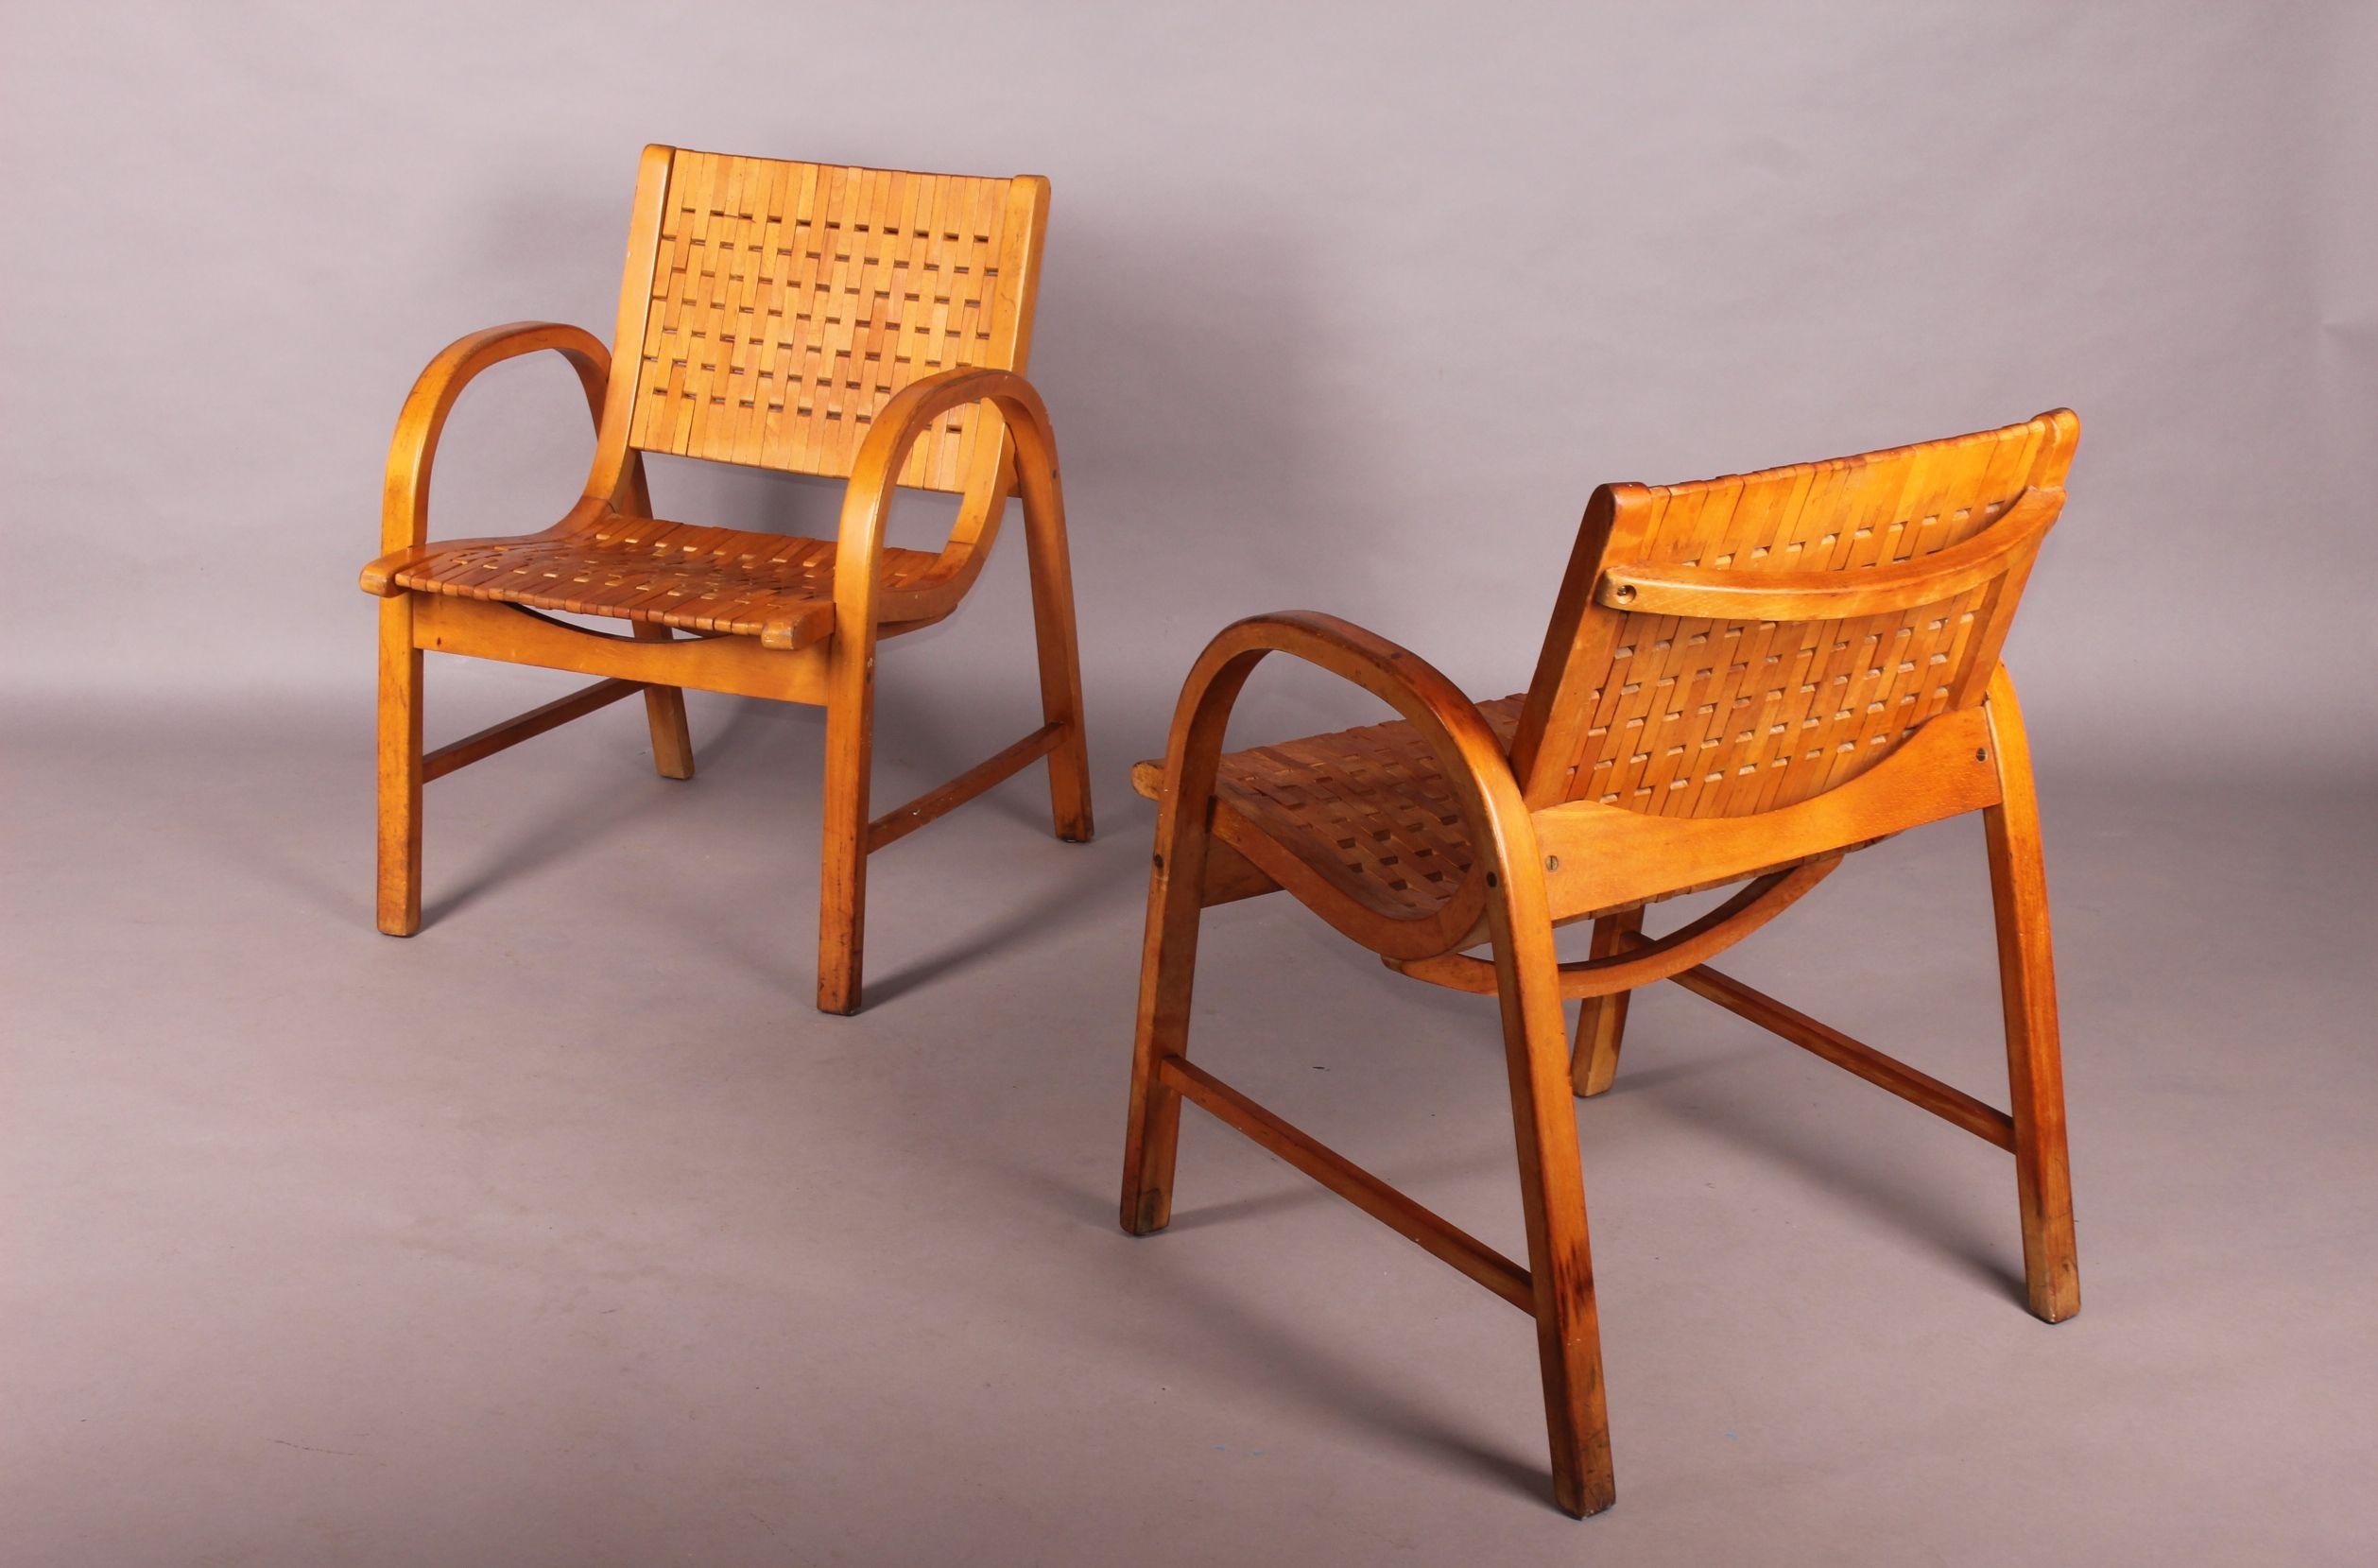 Pair of Bauhaus armchairs designed by Erich Diekmann, old and nice patina.